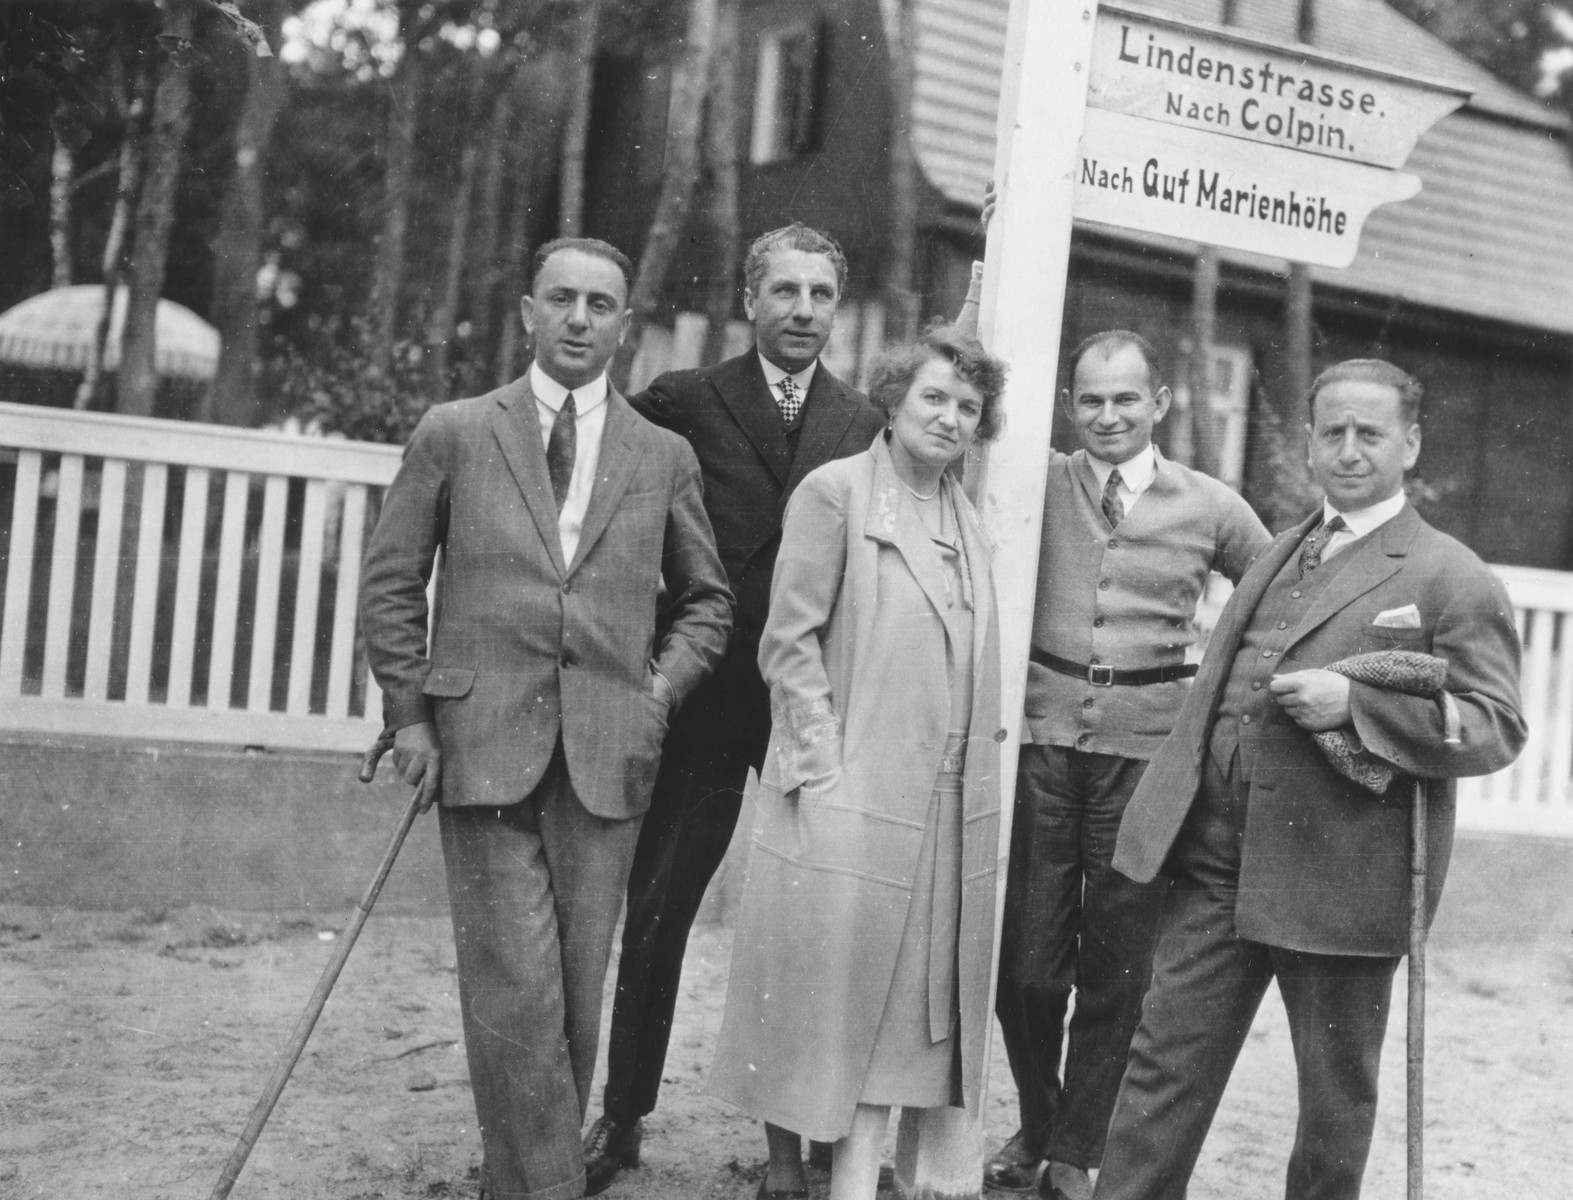 A group of German Jews poses next to a street sign in a resort town in Germany.

Among those pictured is Ludwig Plachte (at the left) and Mr. Salomon, Ludwig's business partner (on the right).